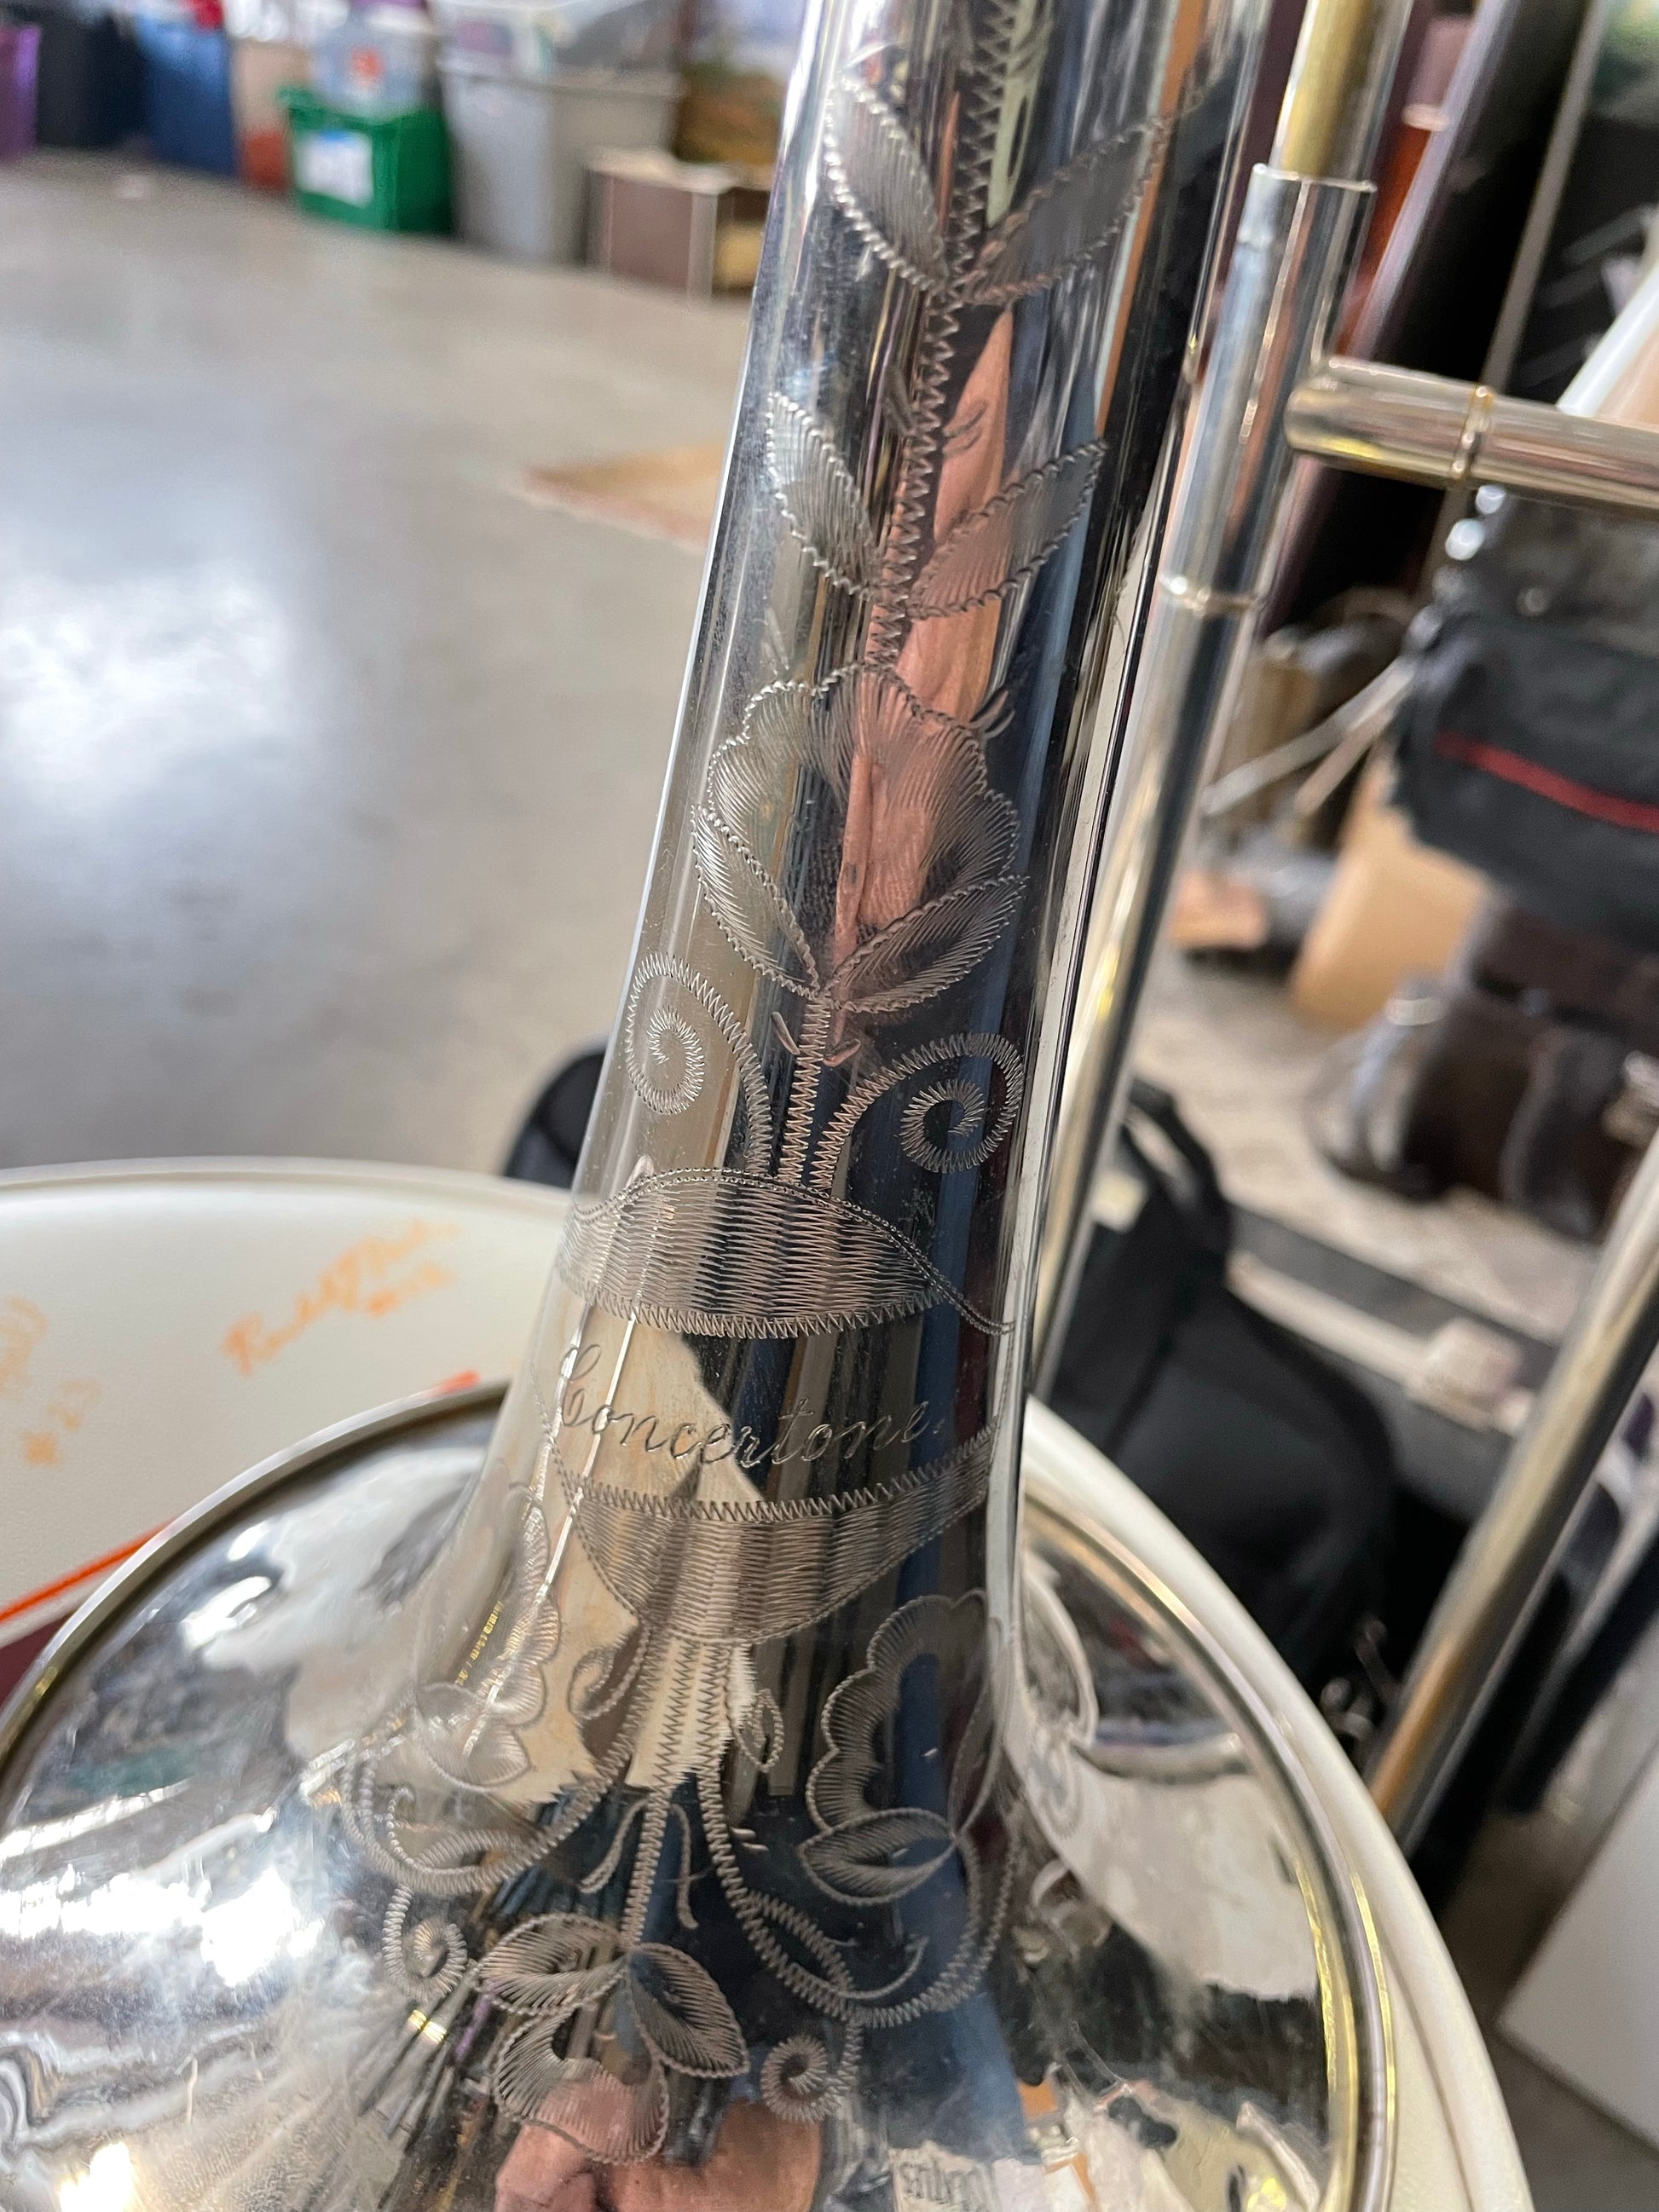 Beautifully engraved design on the bell of the Trombone, a floral design etched into the silver of the trombone.